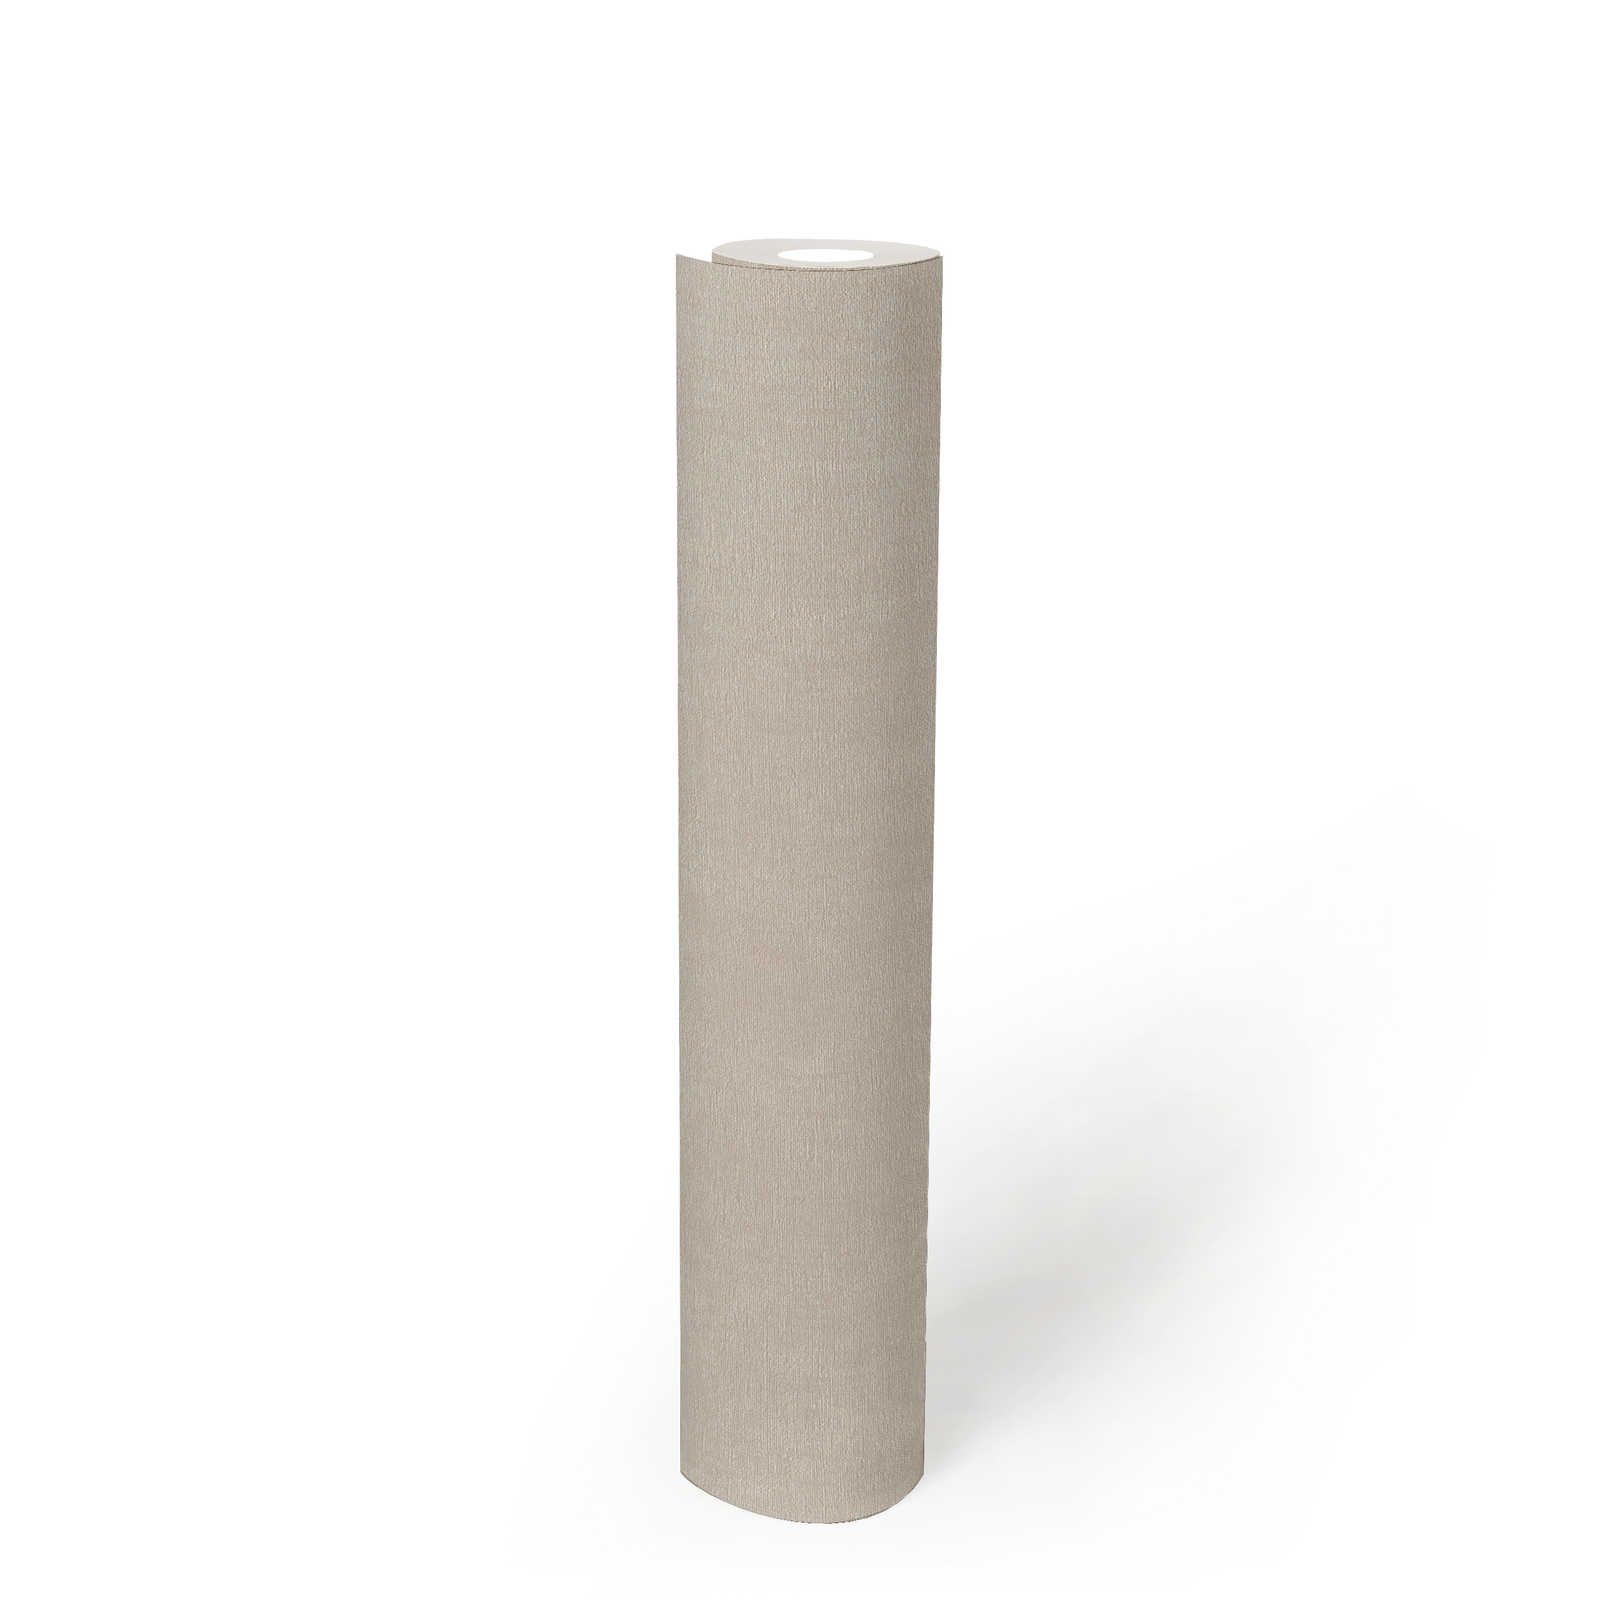             Lightly textured non-woven wallpaper, single-coloured - beige
        